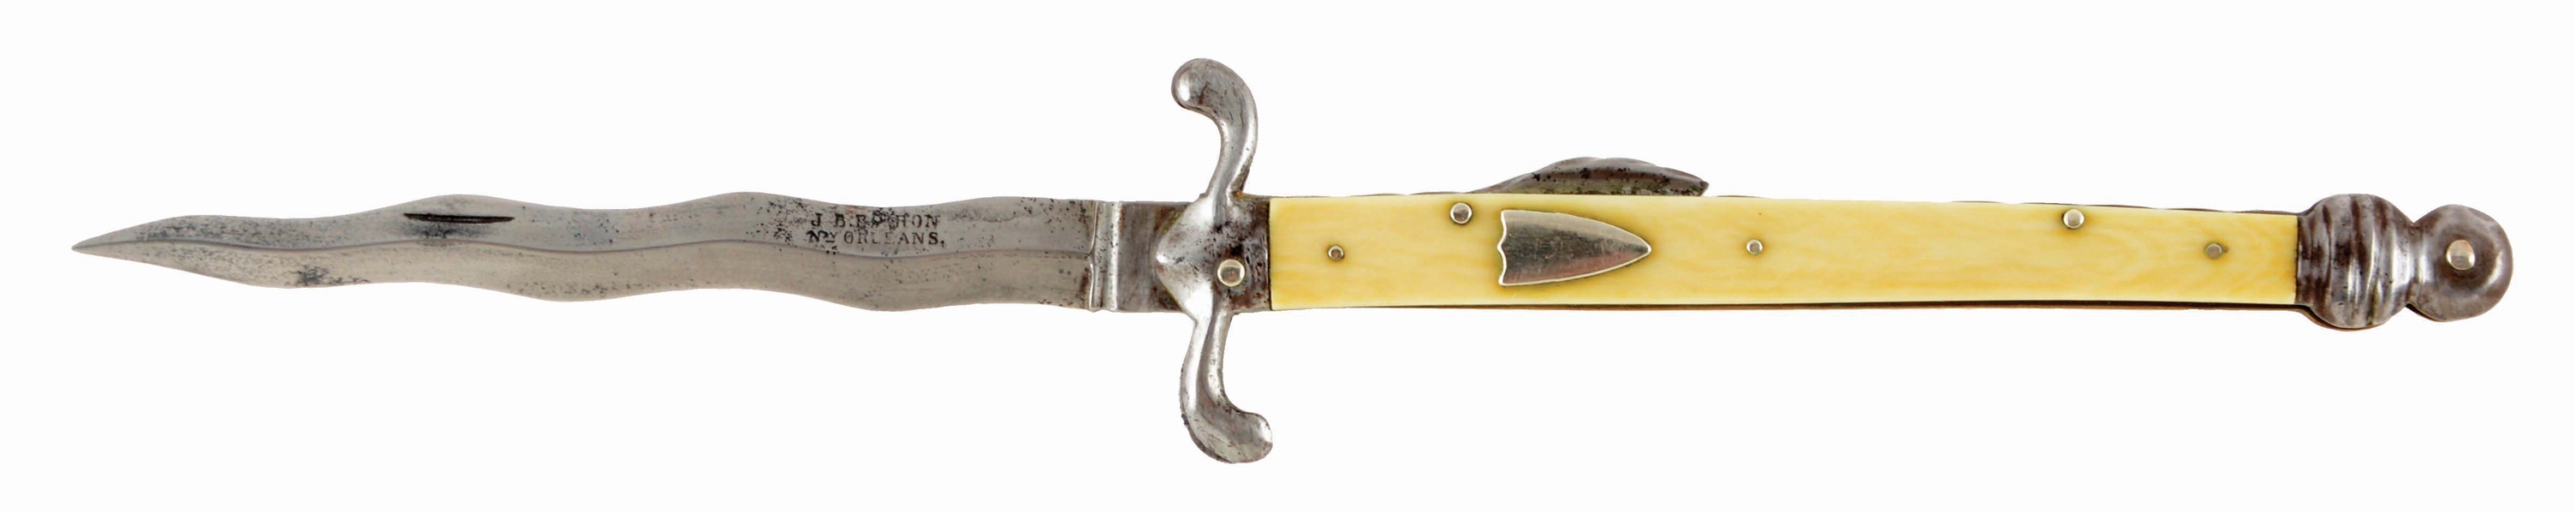 1850S ERA NEW ORLEANS FOLDER WITH IVORY GRIP AND KRIS TYPE BLADE.